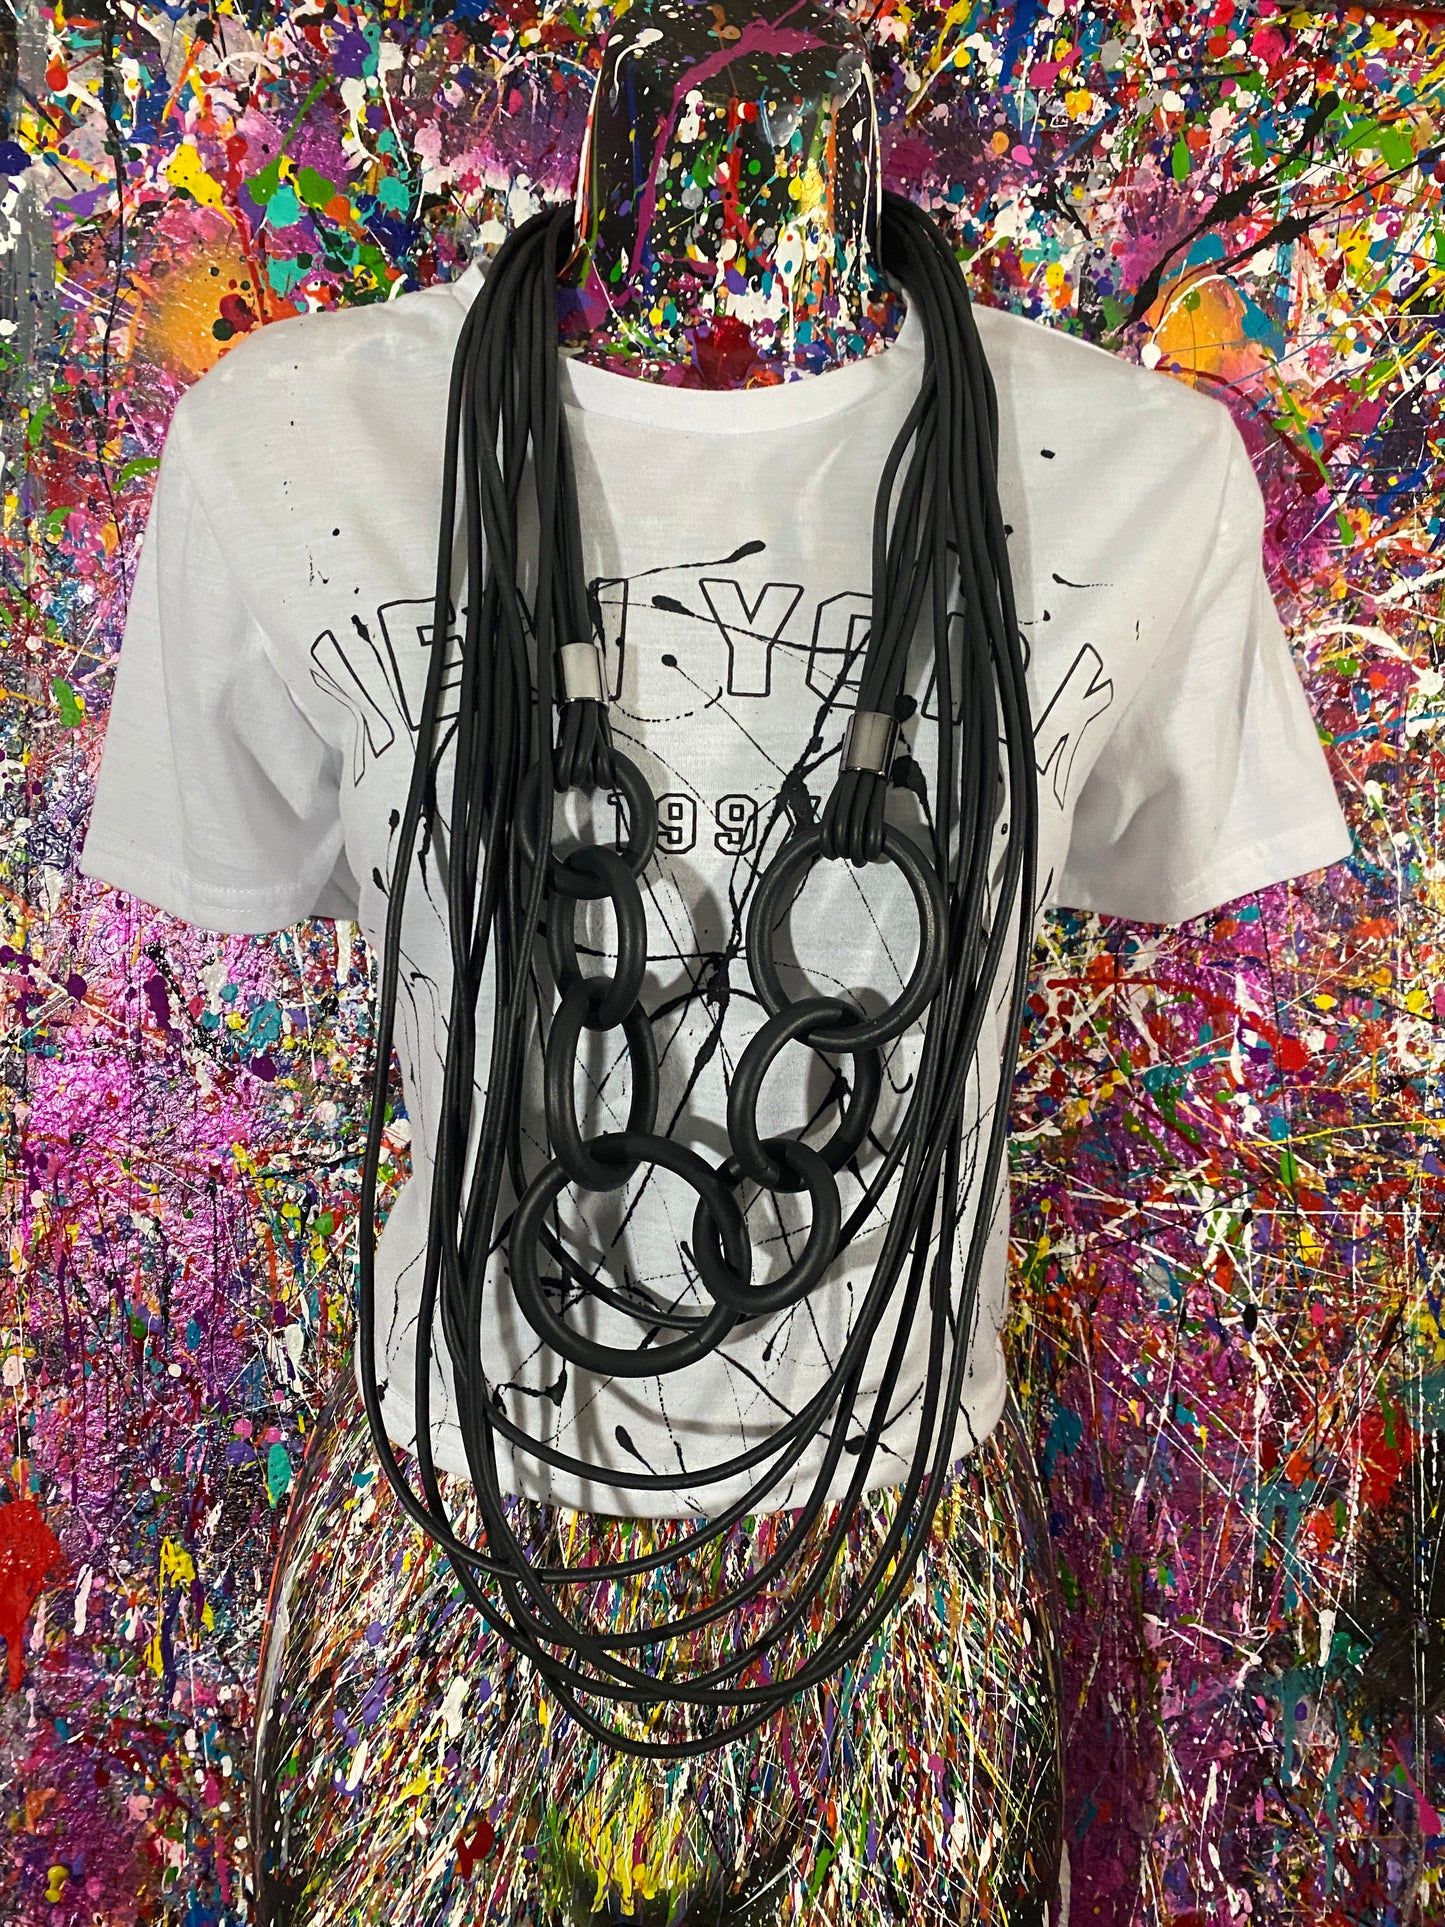 Pure Delicious! Super light weight black rubber statement necklaces (50")